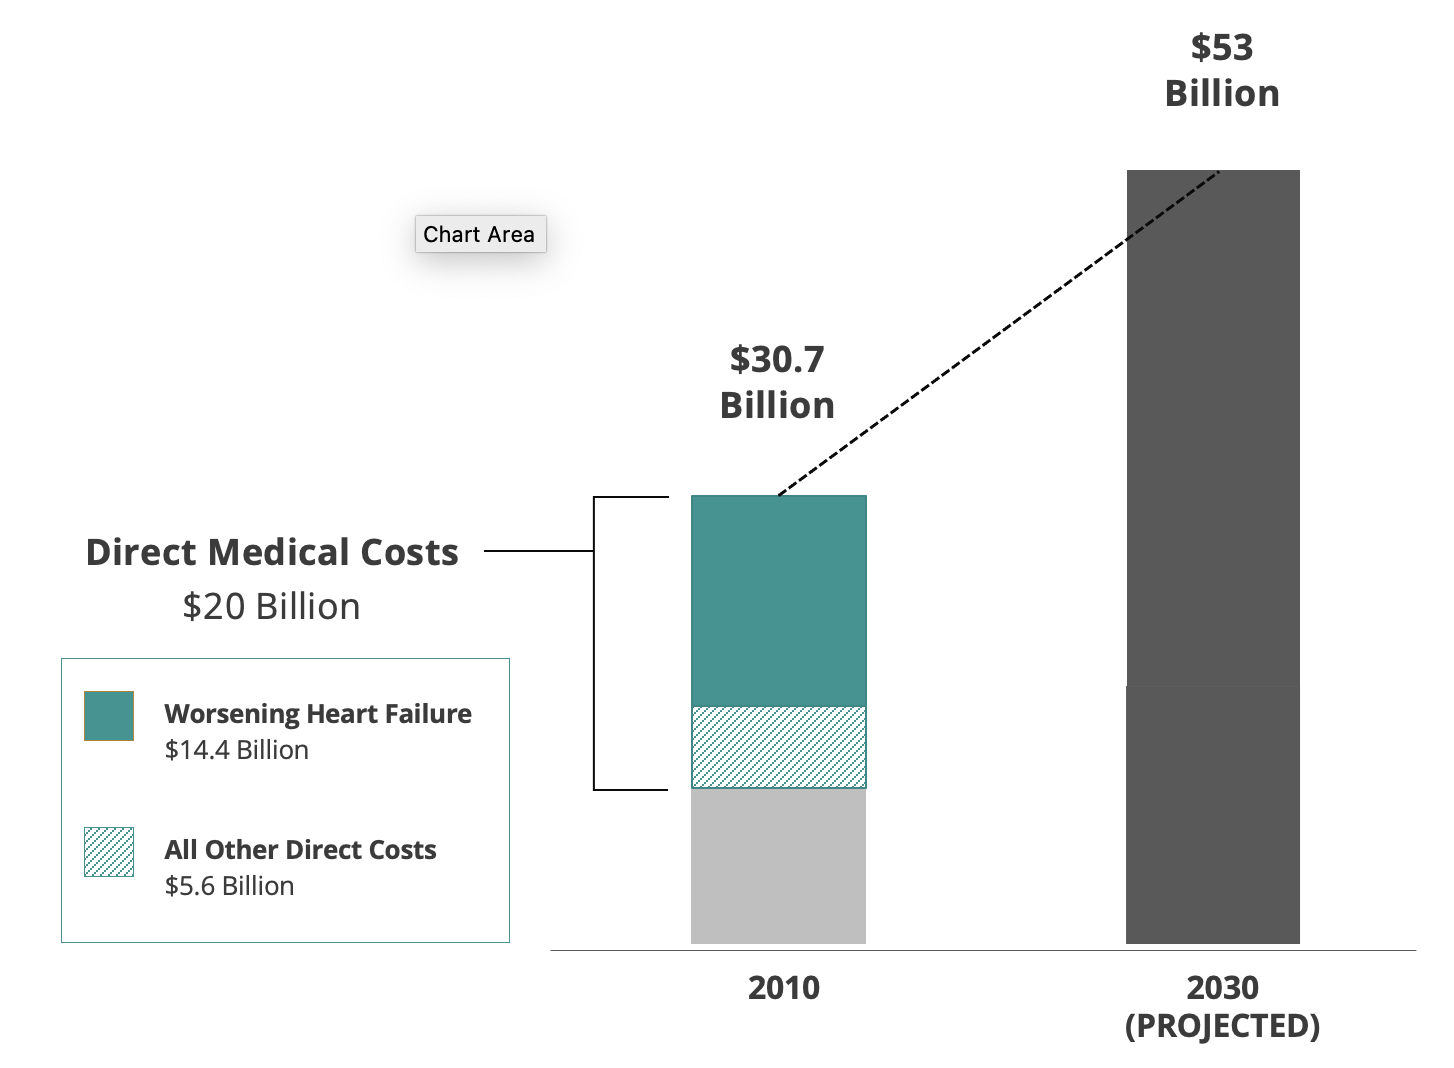 The Cost of Heart Failure in U.S. Chart